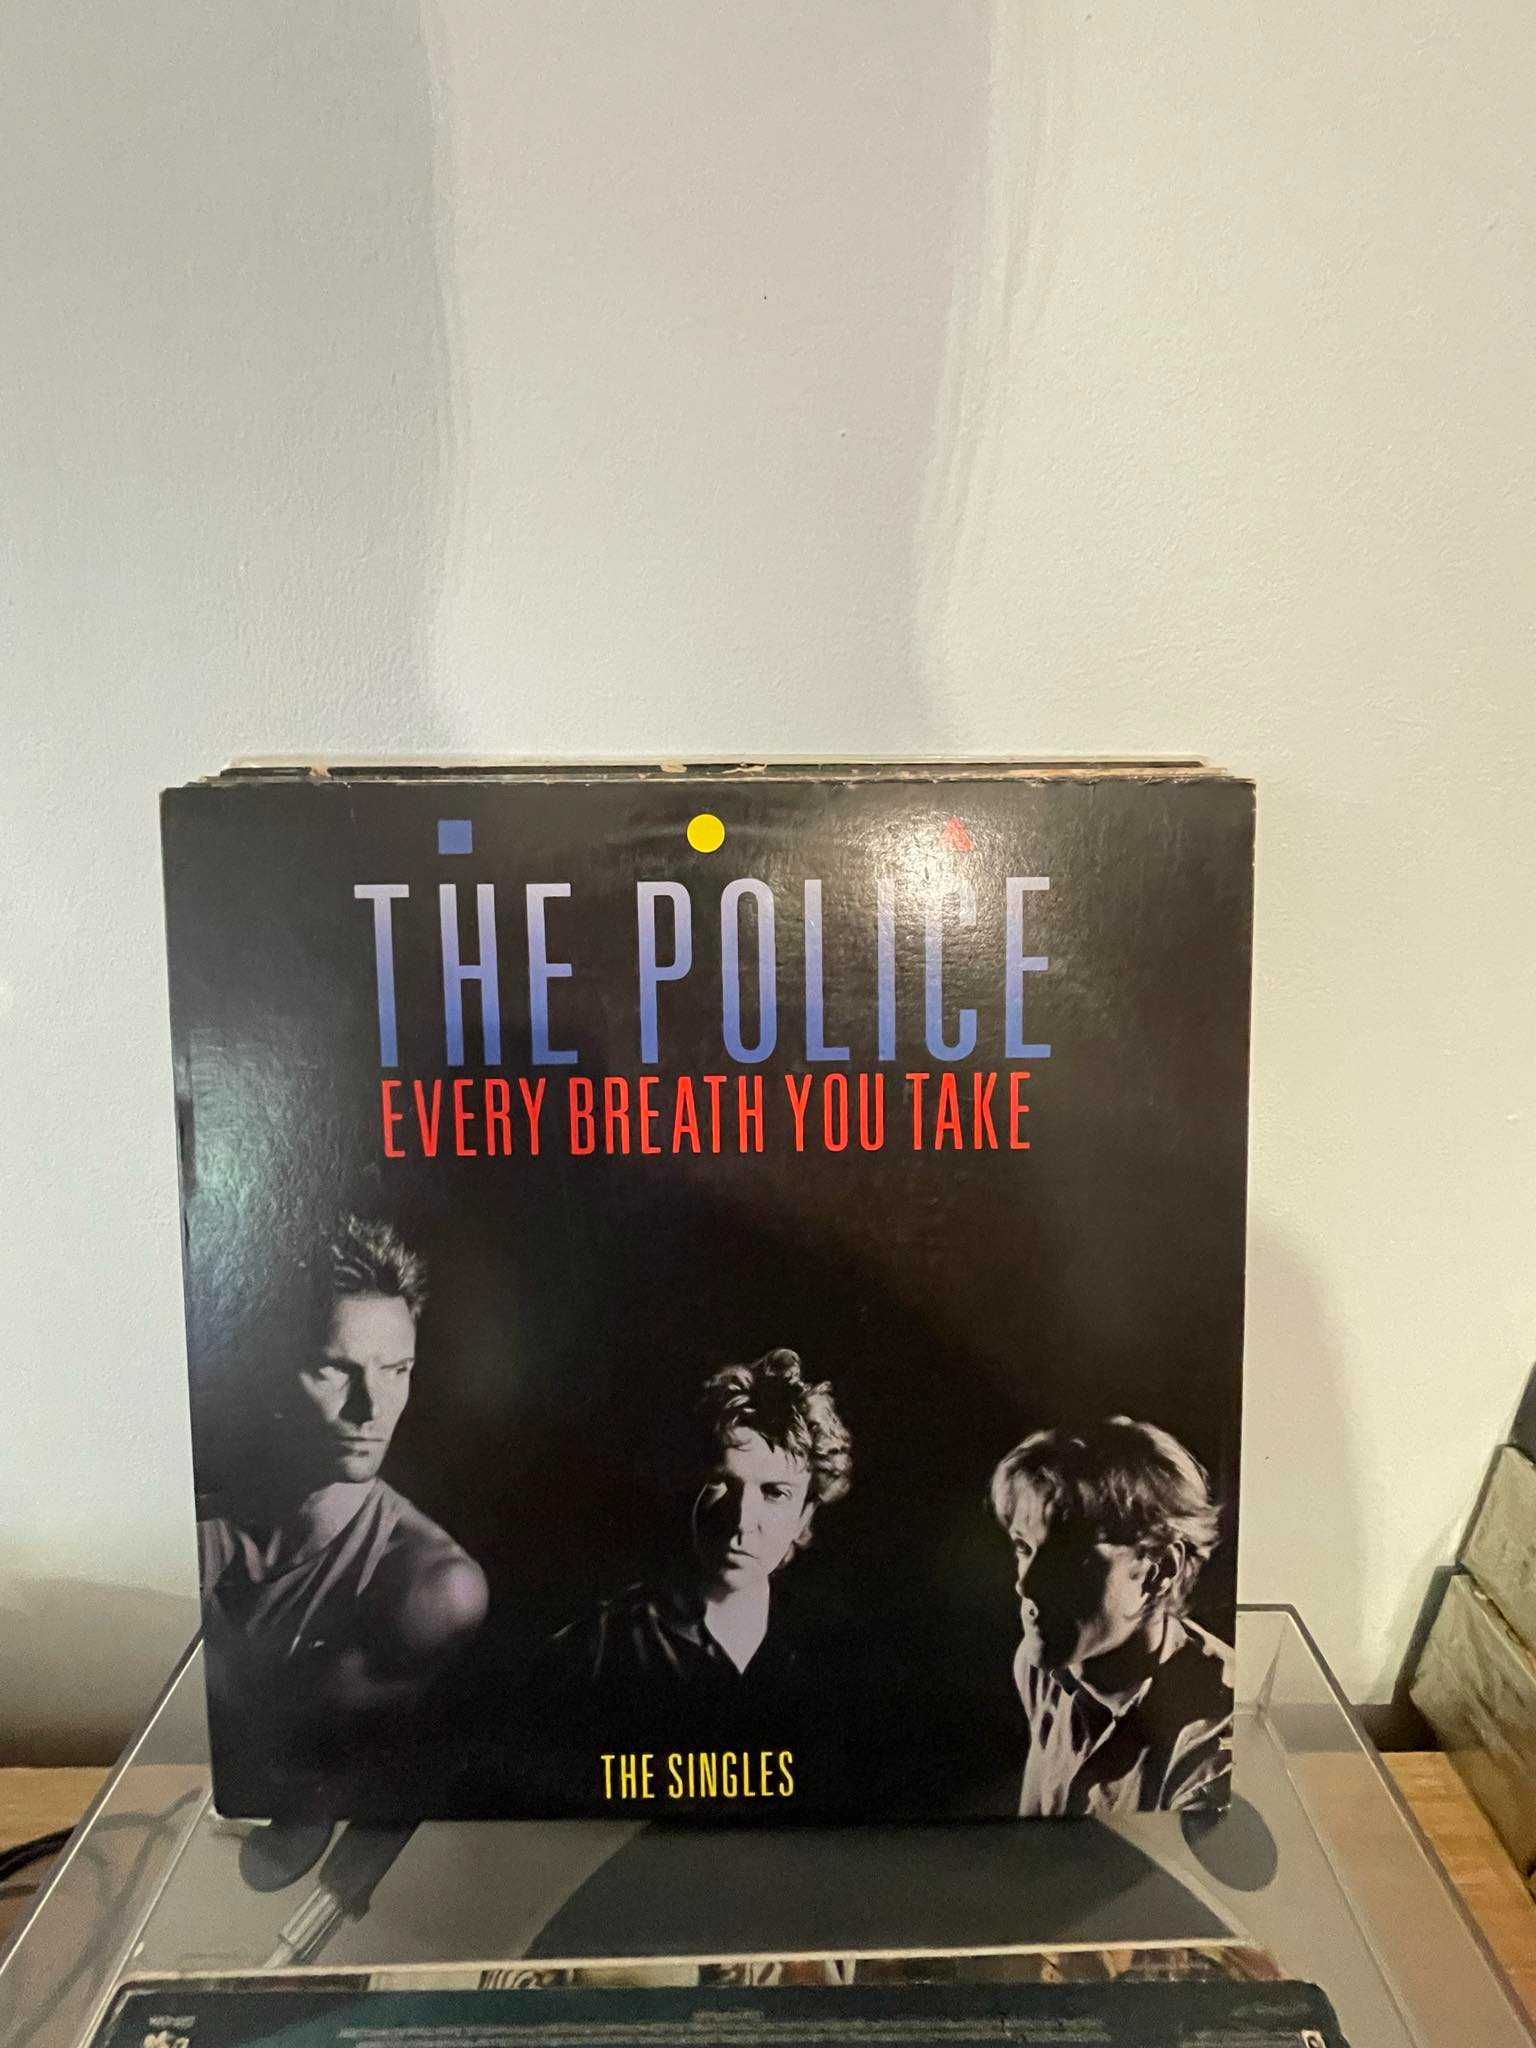 The Police – Every Breath You Take (The Singles)